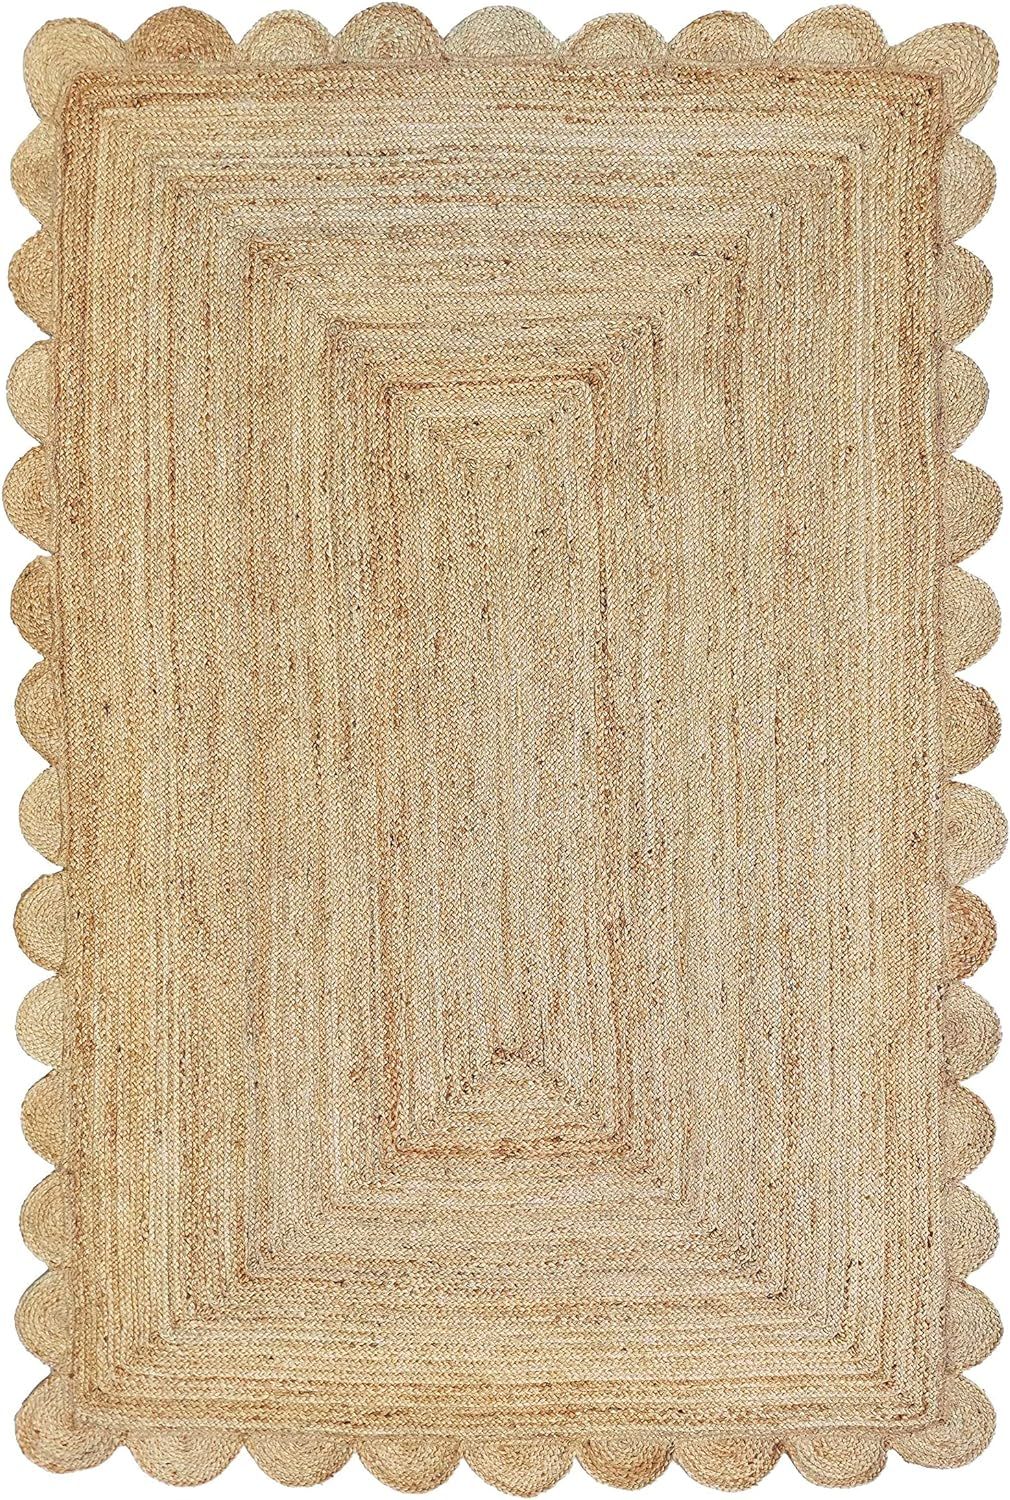 Scalloped Natural Jute Area Rug, Natural Color (8'X10') | Amazon (US)